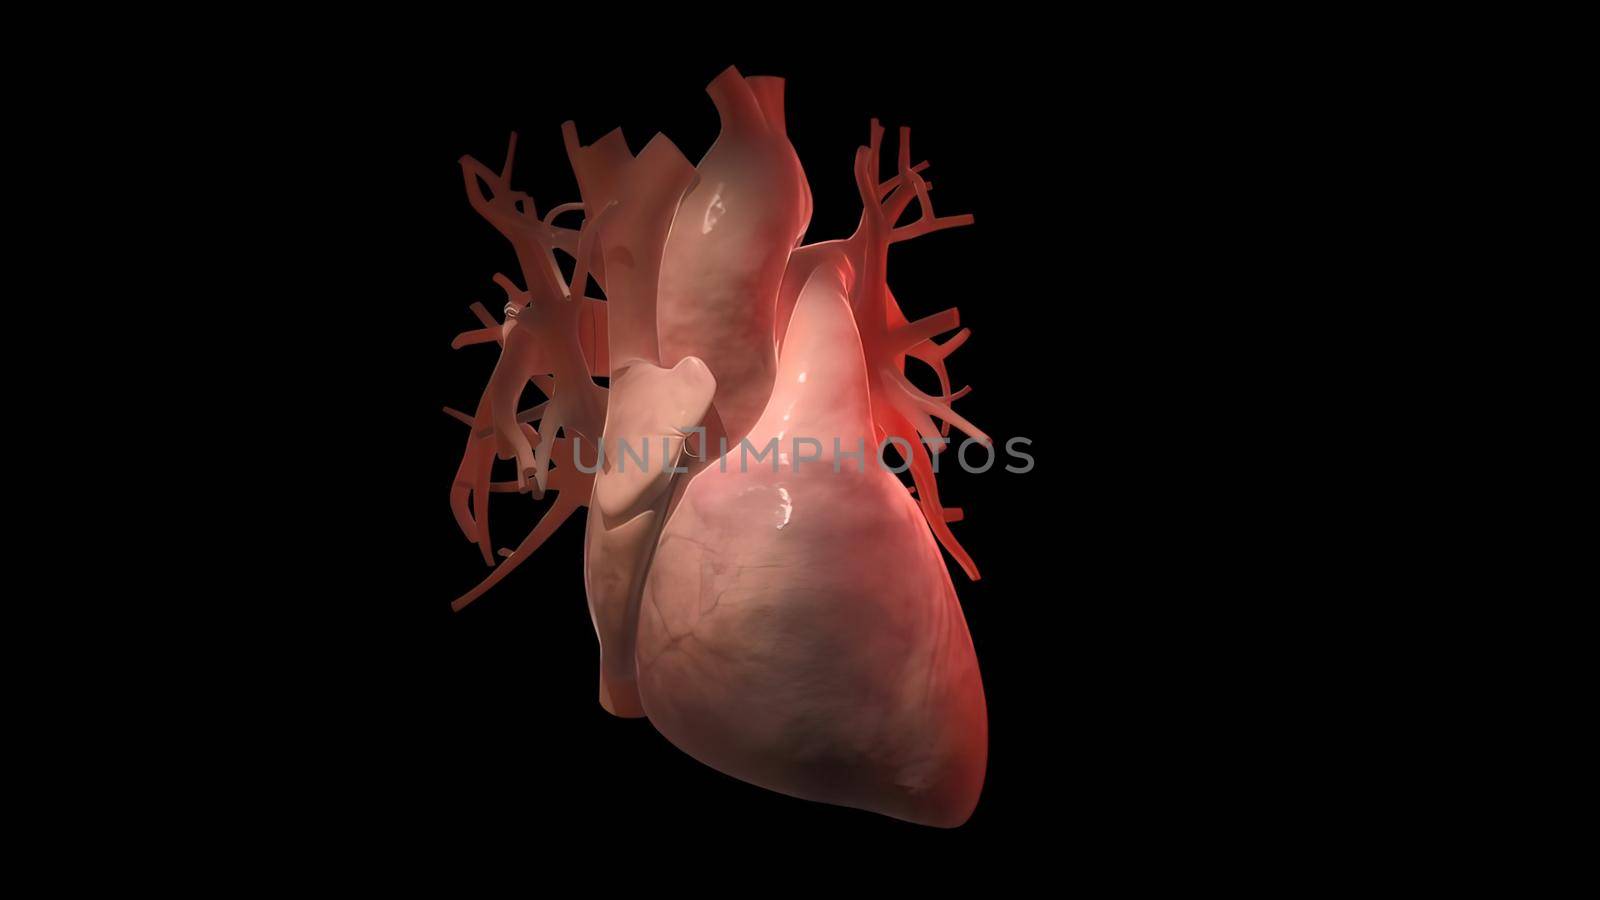 Cardiovascular system with beating heart 3d illustration